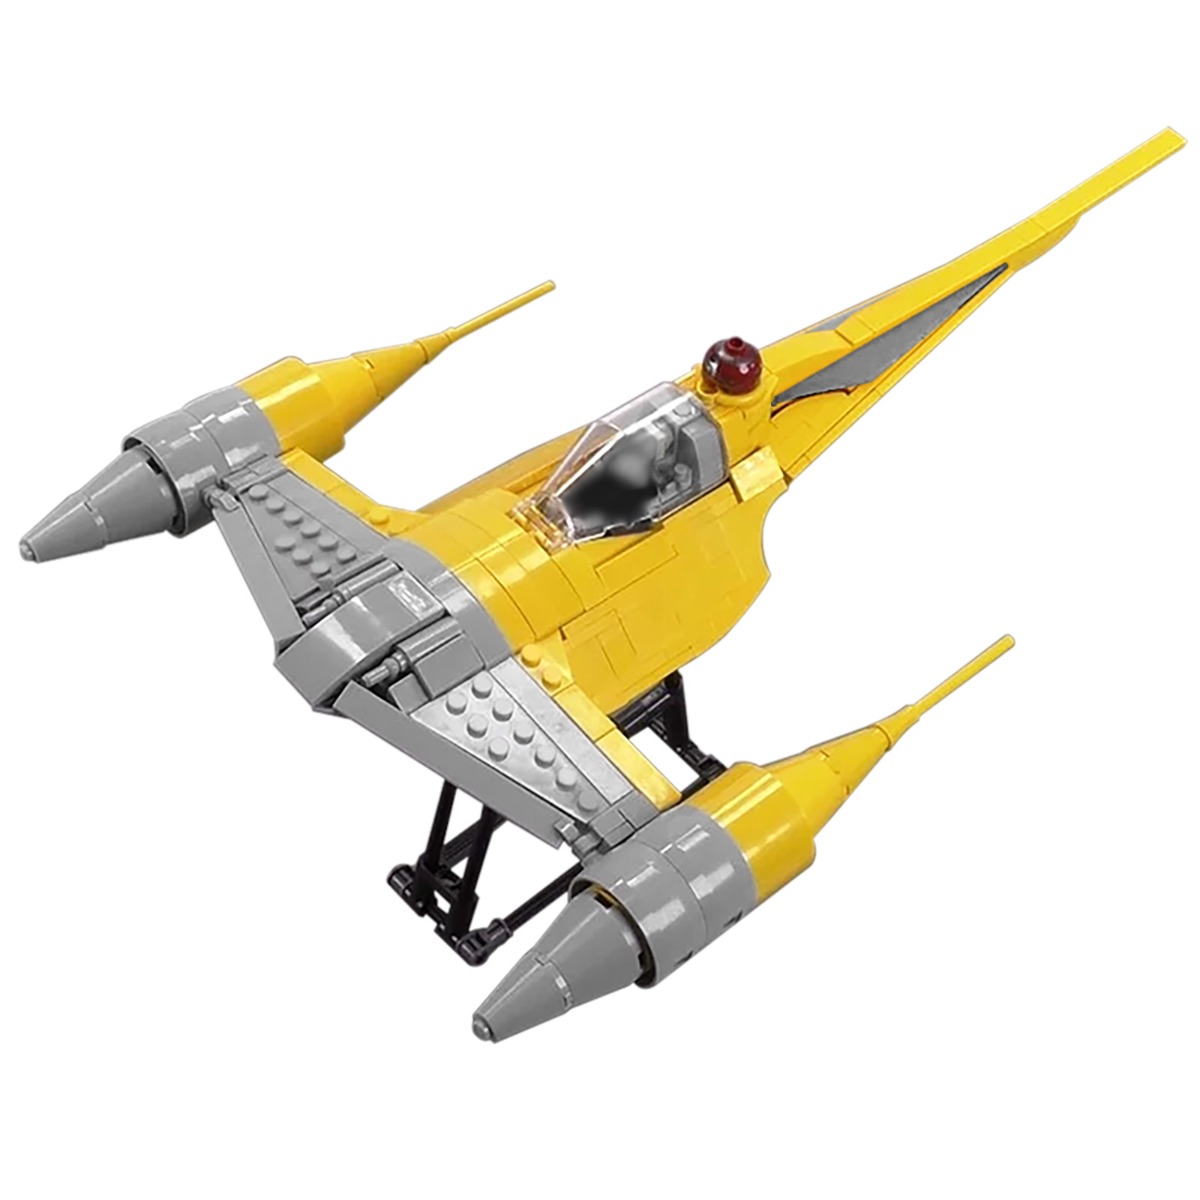 N-1 Starfighter – Minifig Scale STAR WARS MOC-13997 WITH 373 PIECES